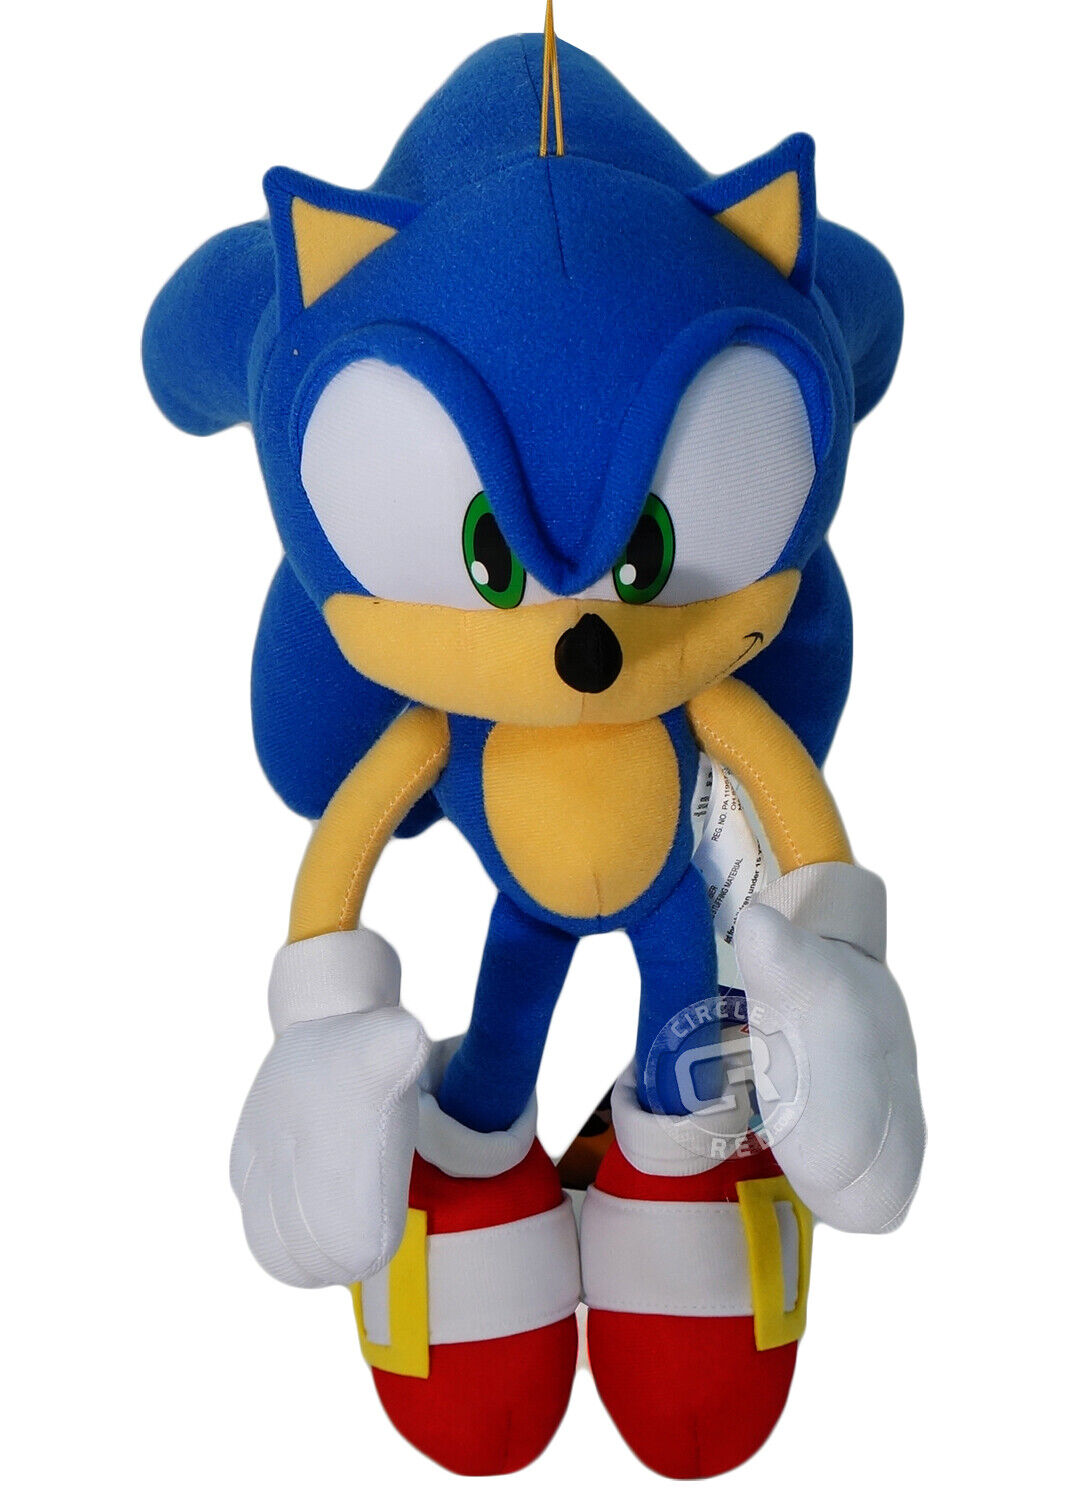 Sonic The Hedgehog SEGA Sonic 12-inch Plush Toy Official Licensed GE Animation